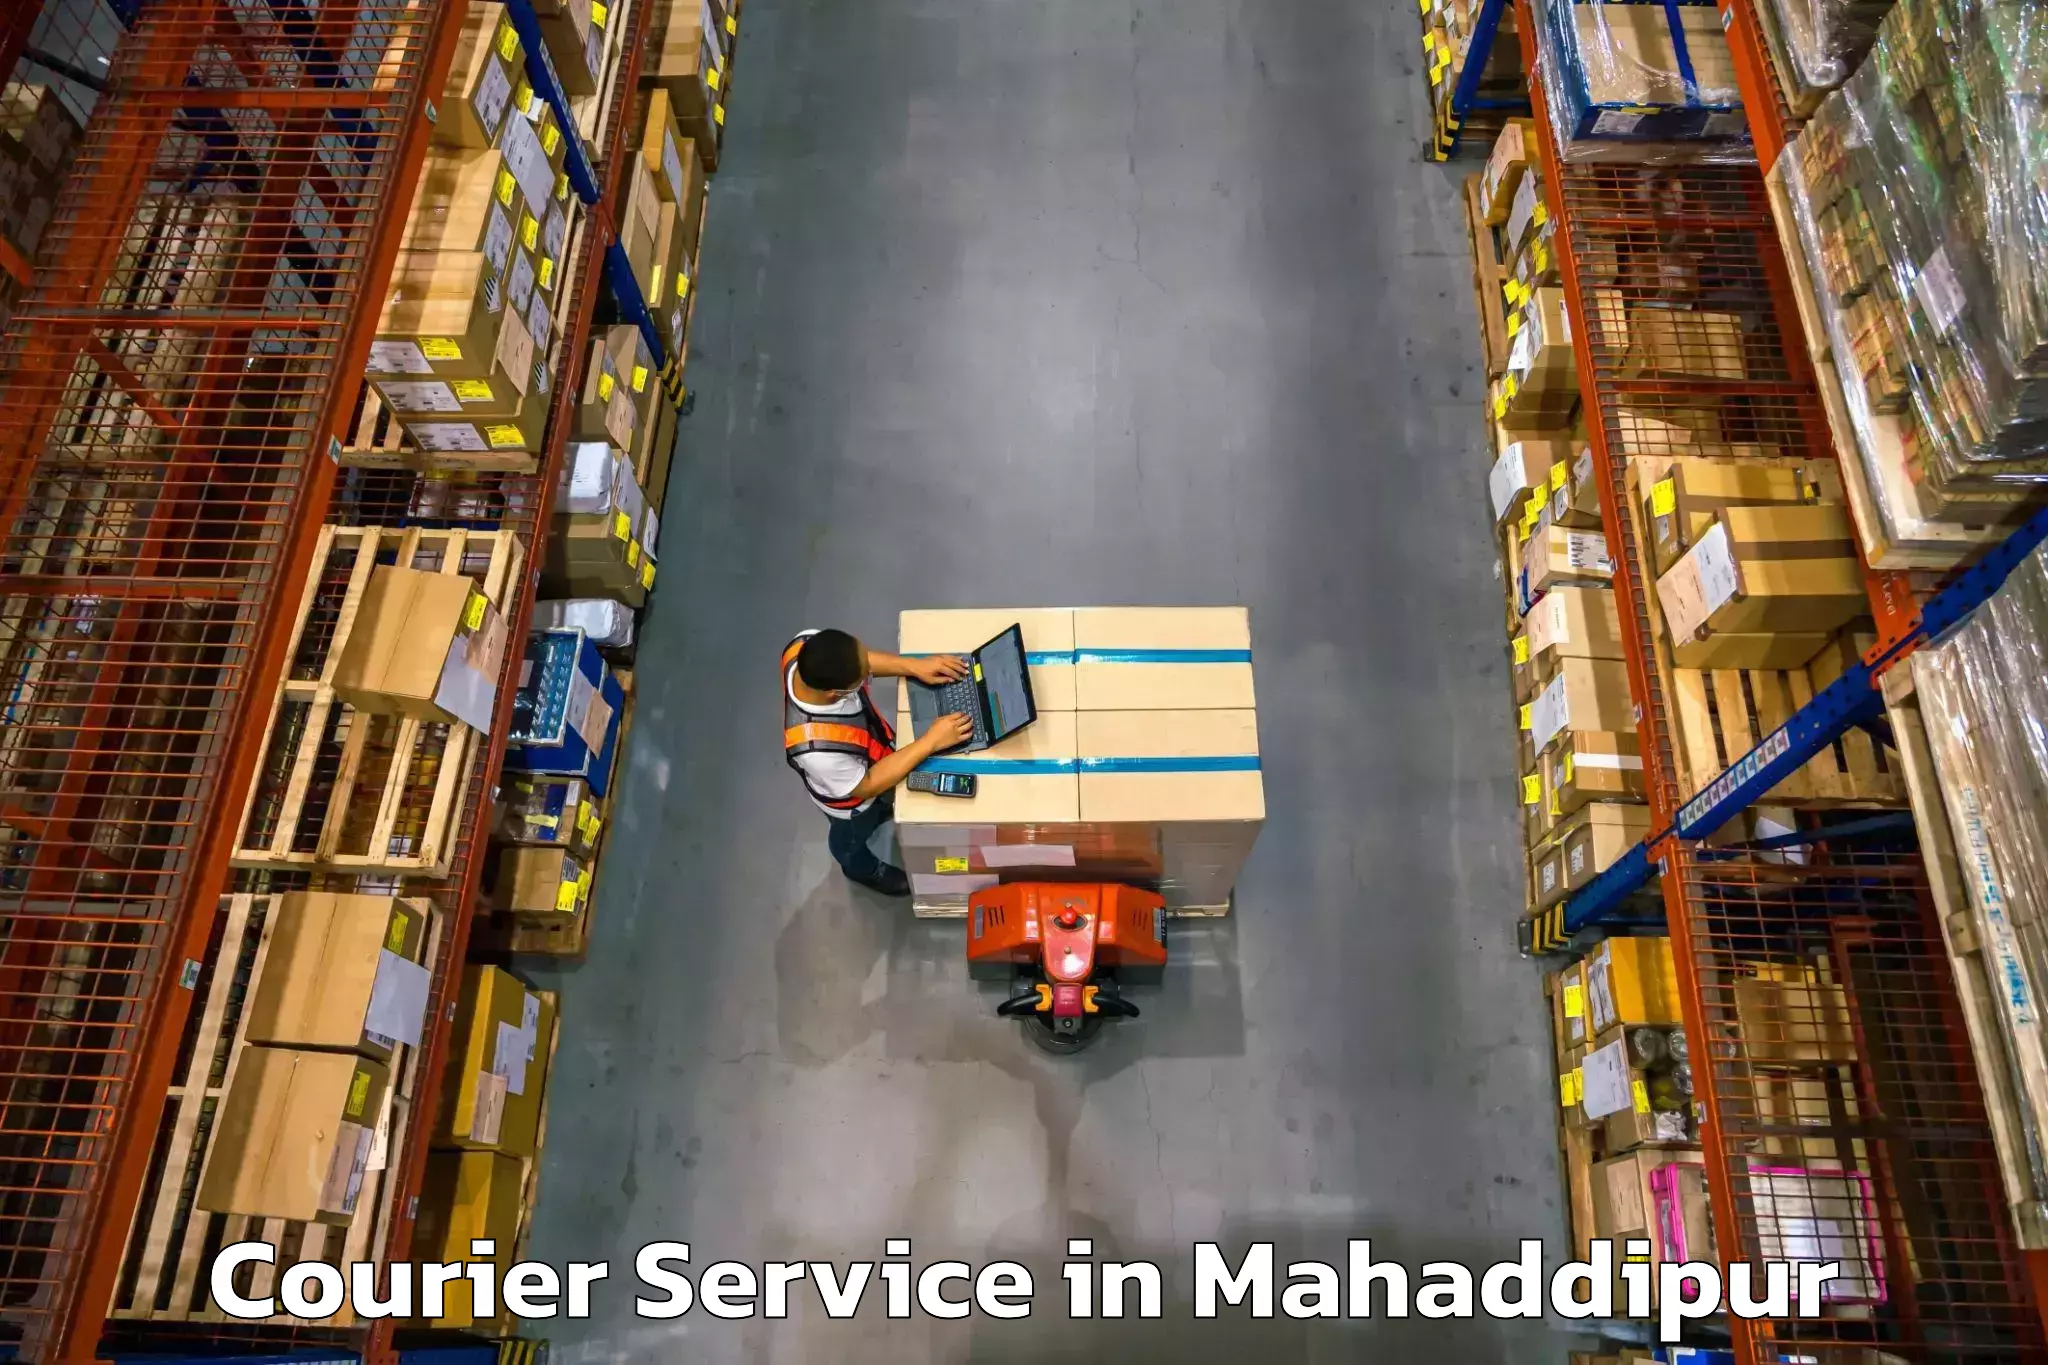 Efficient shipping operations in Mahaddipur